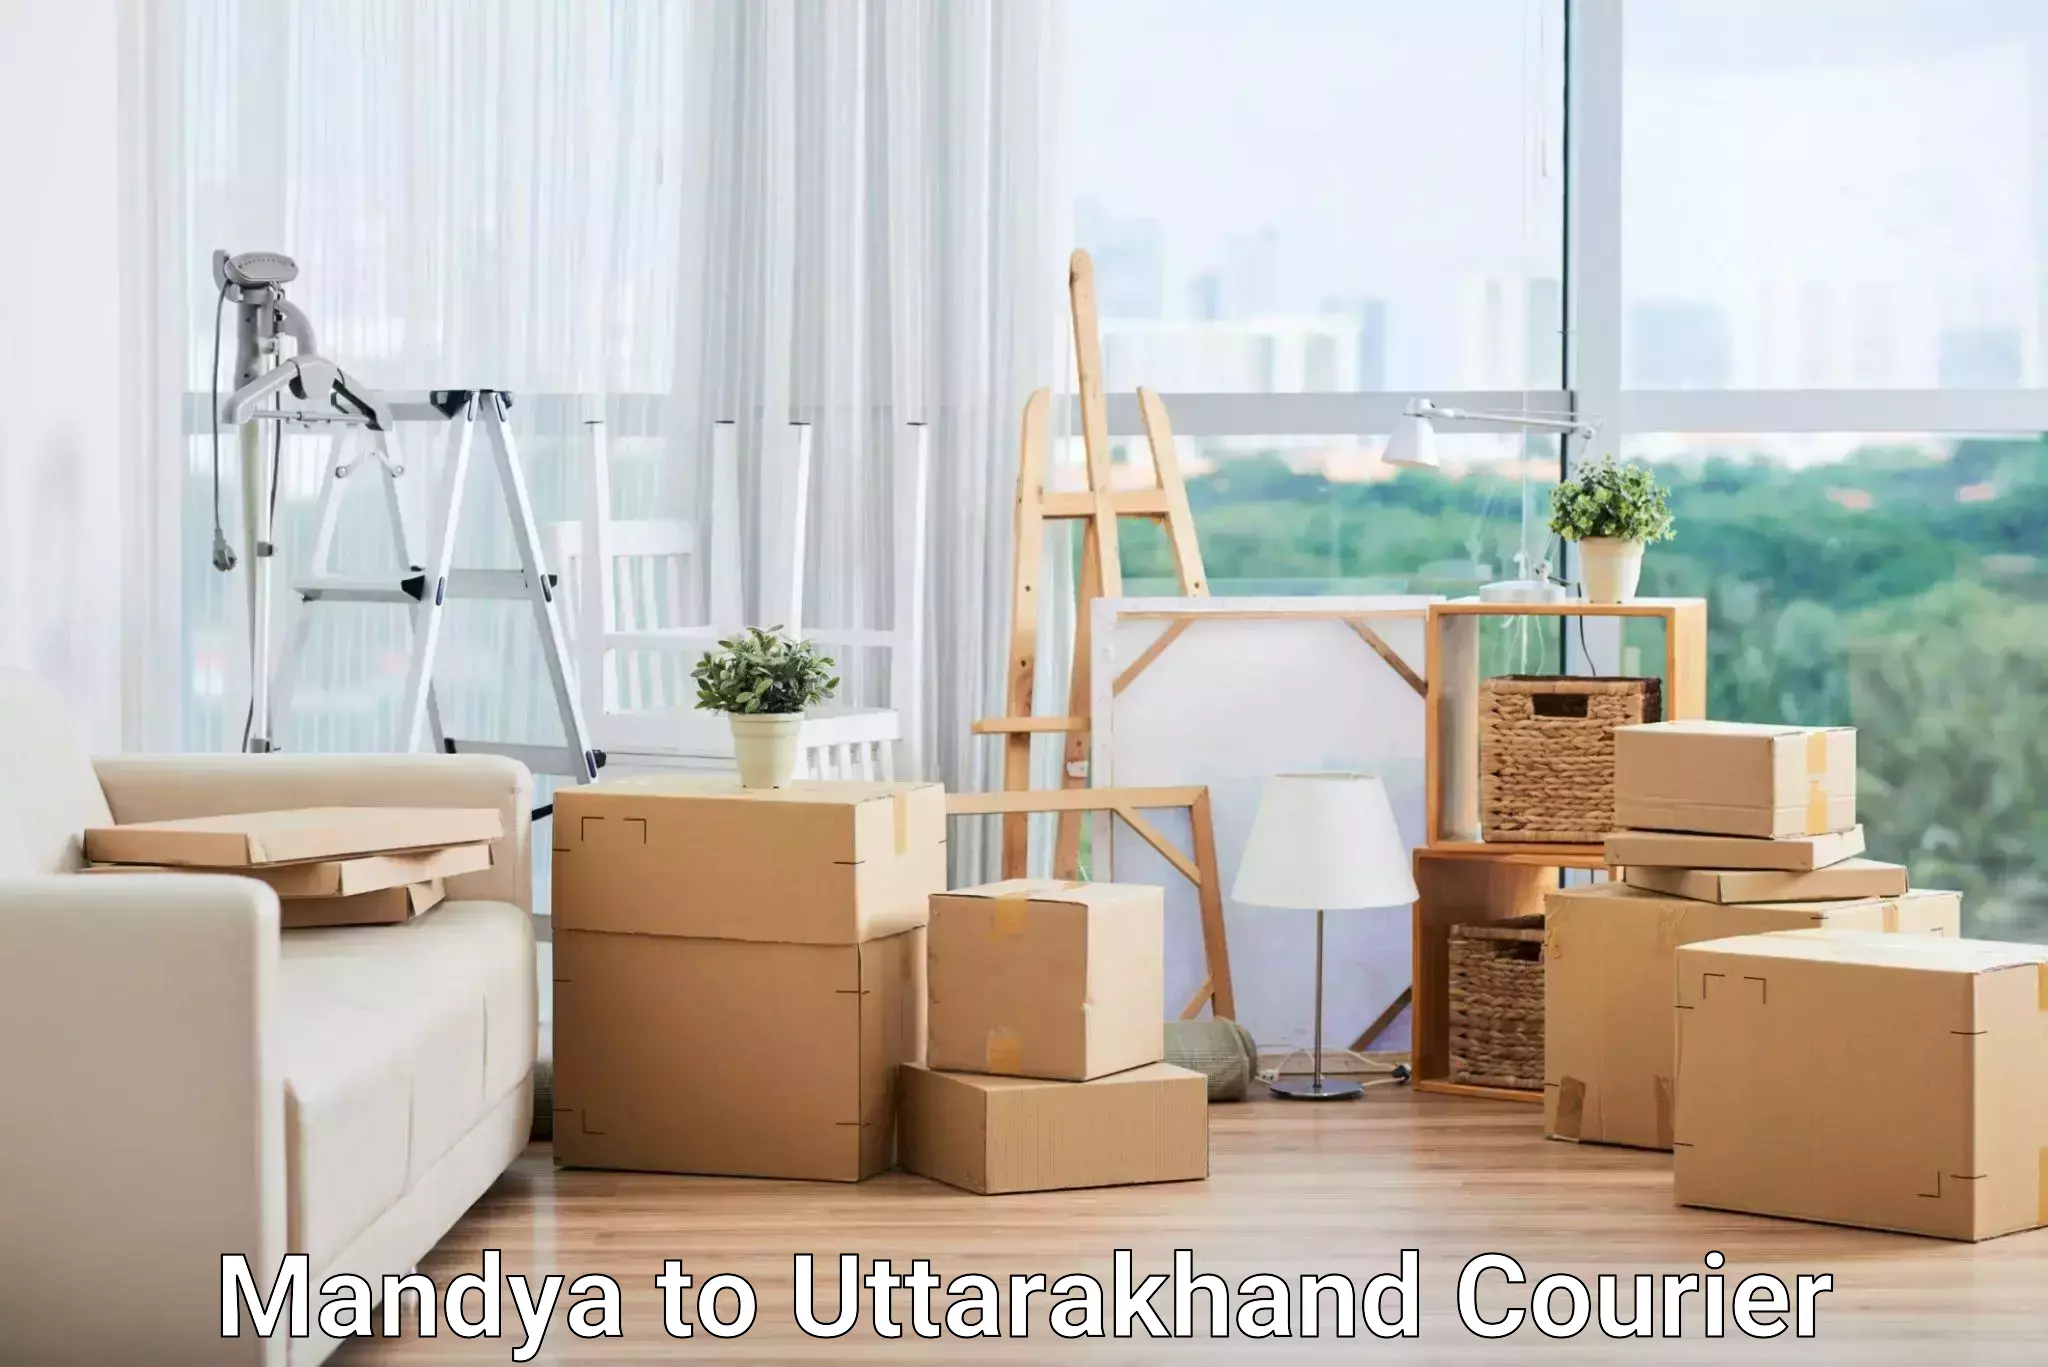 Round-the-clock parcel delivery Mandya to Rudraprayag